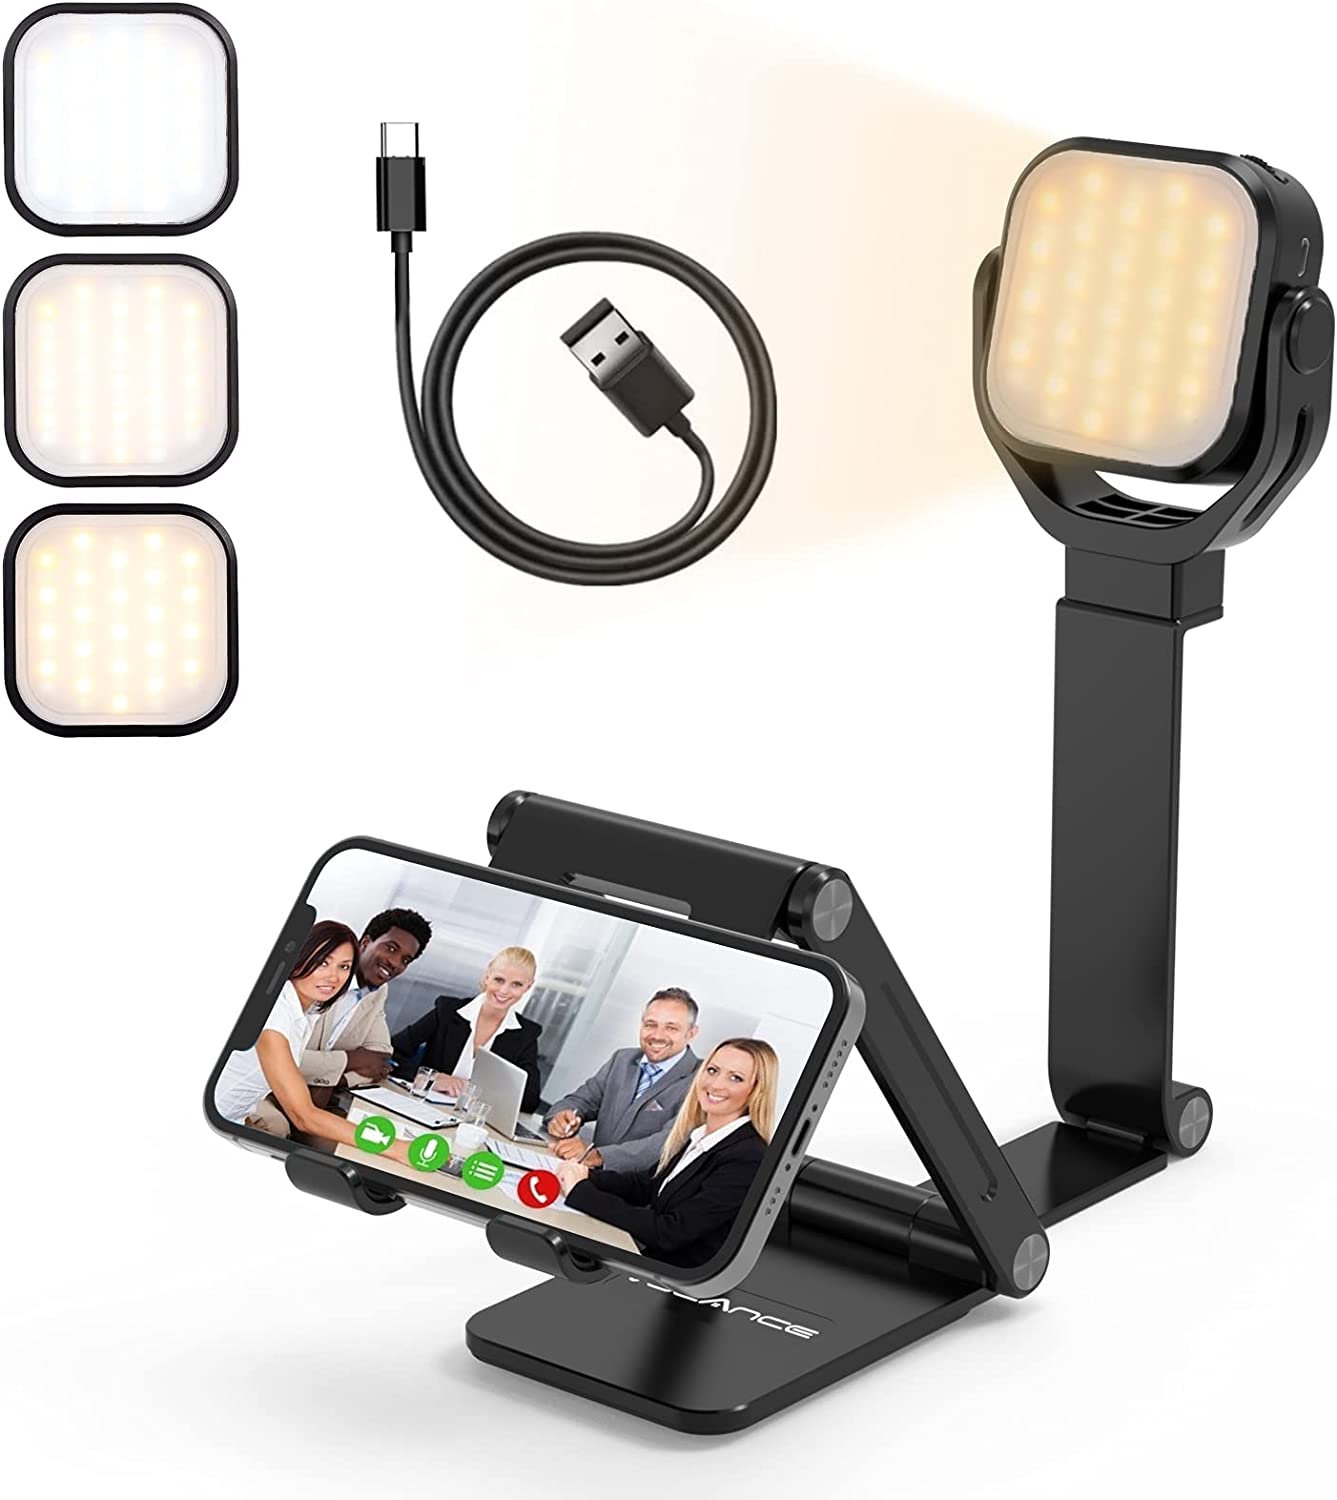 LED Ring Light with Tripod Stand，Phone Holder for Live Streaming & YouTube Video, Dimmable Desk Makeup Ring Light for Photography